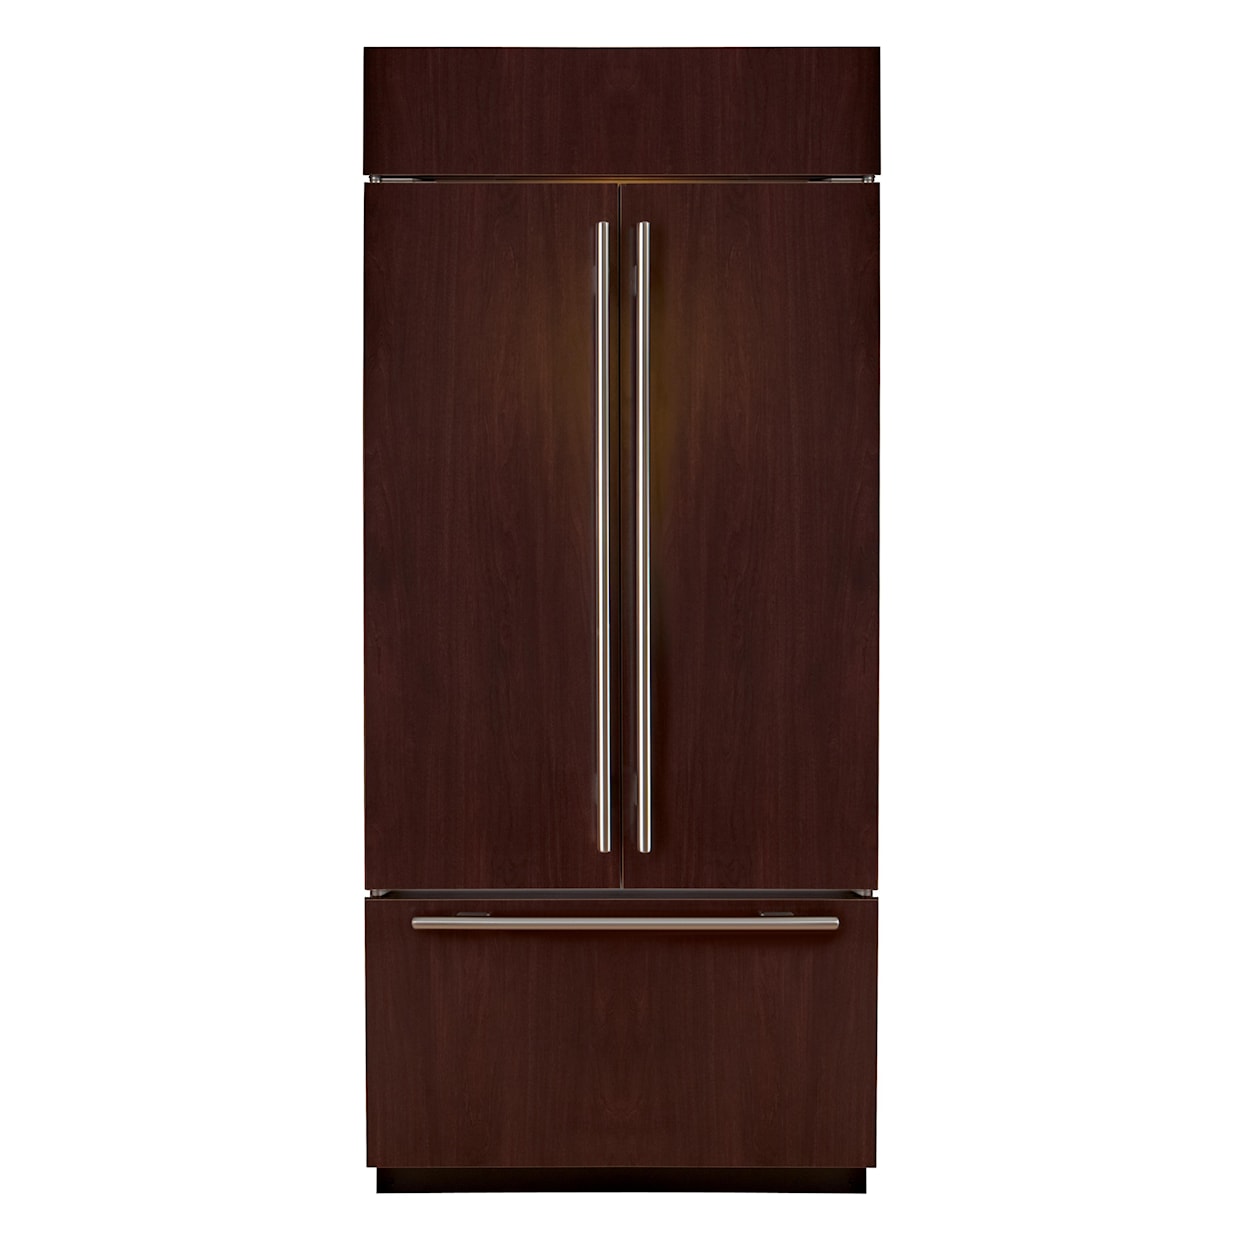 Sub-Zero Built-In Refrigeration 36" Over-and-Under with French Door